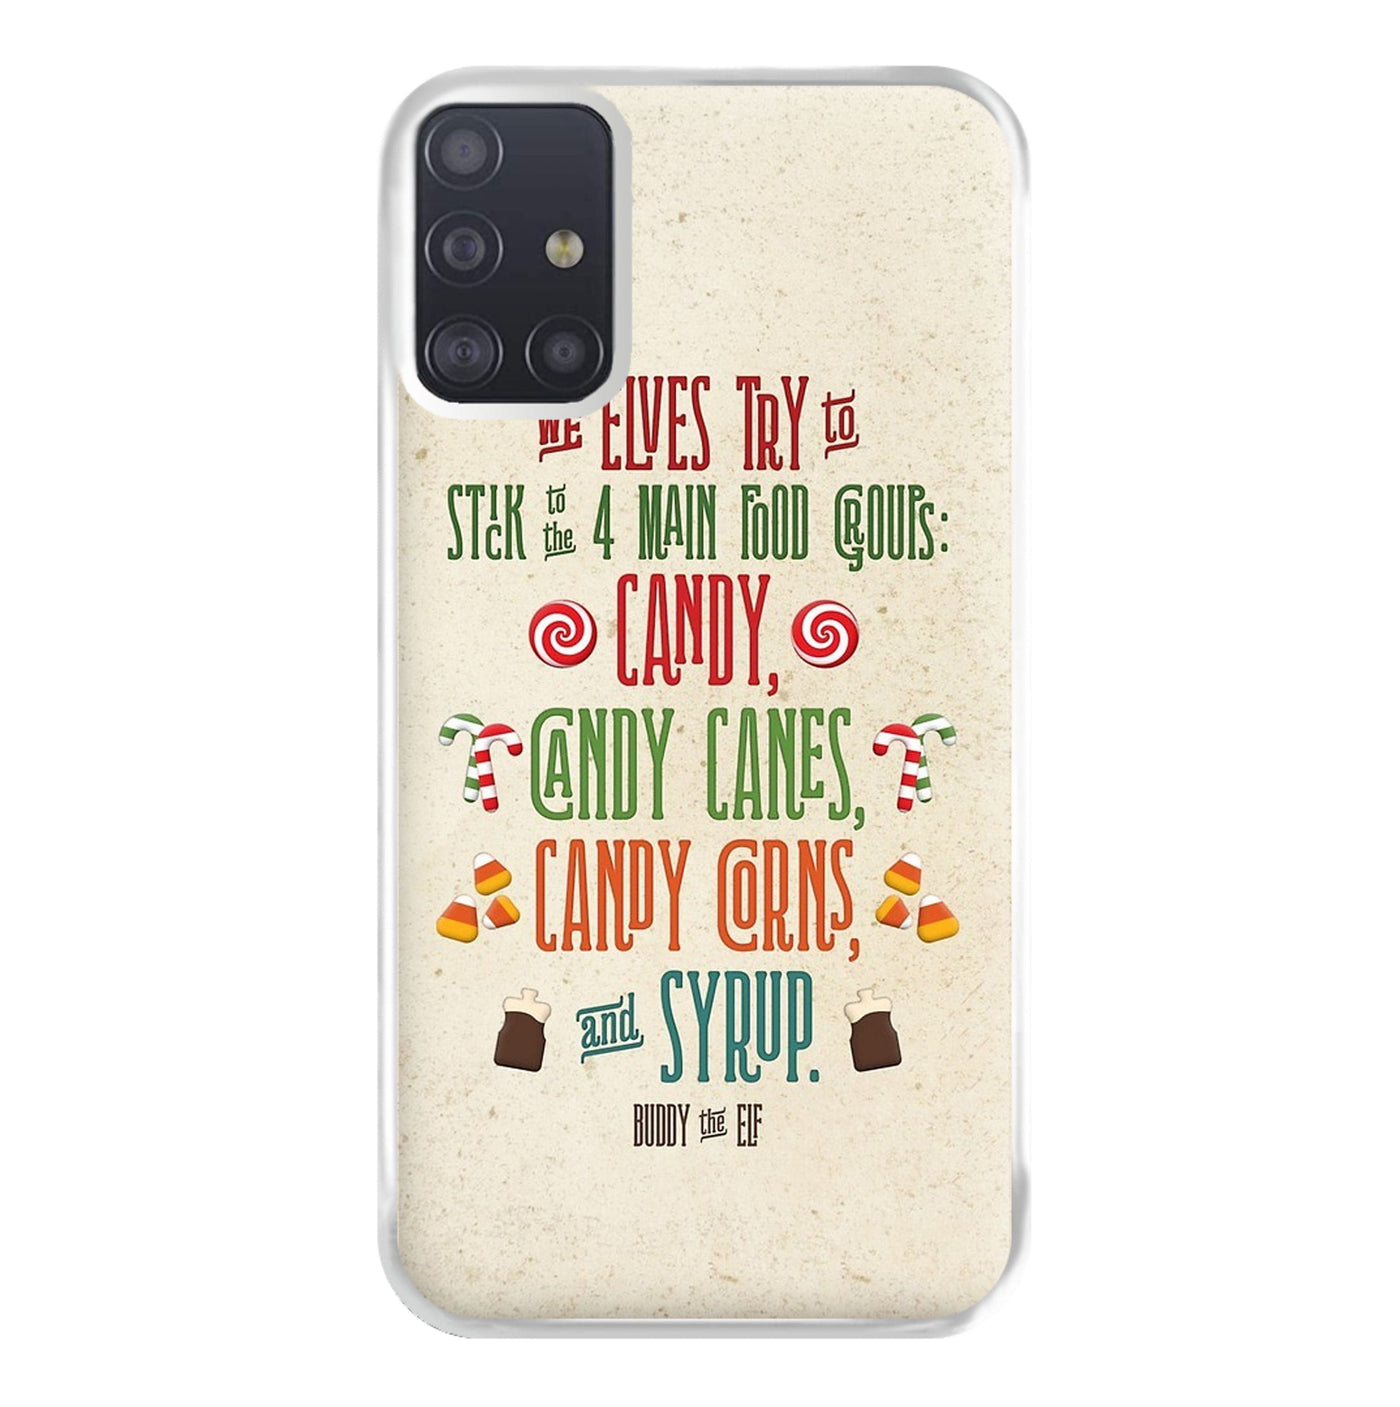 The Four Main Food Groups - Buddy The Elf Phone Case